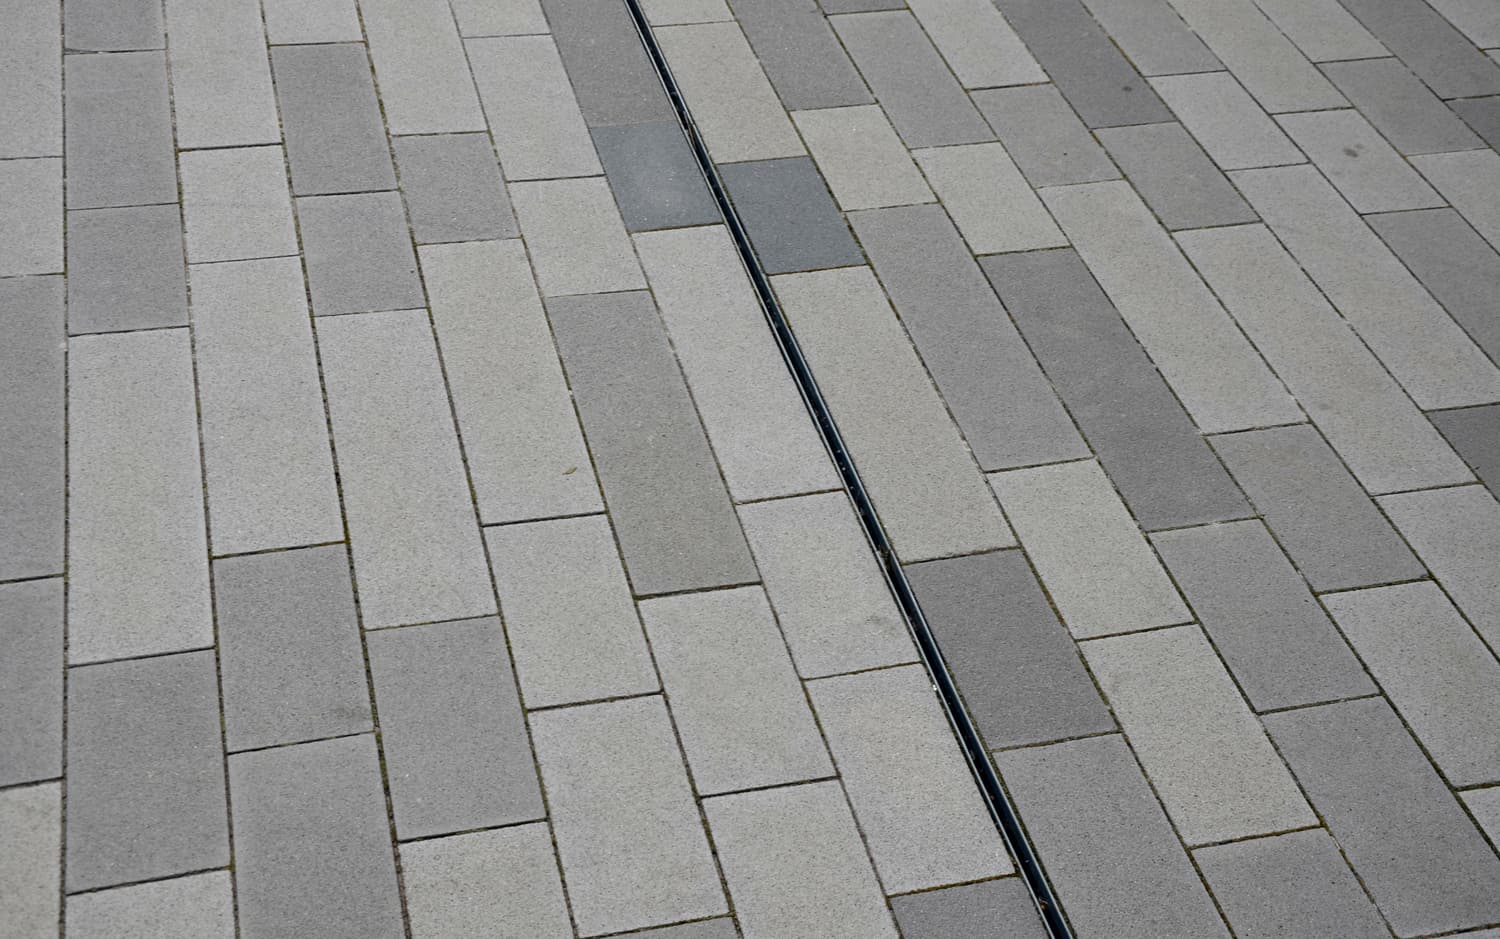 large, format, paving, gray, granite, water, drained, rain, through, slotted, slot, stainless, channel, drain, drainage, steel, under, surface, tile, design, overall, look, noticeable, cleaning, element, rectangular, wet, rainy, straight, gap, crack, tiles, pavement, construction, detail, block, paved, floor, outdoor, square, road, street, stone, asphalt